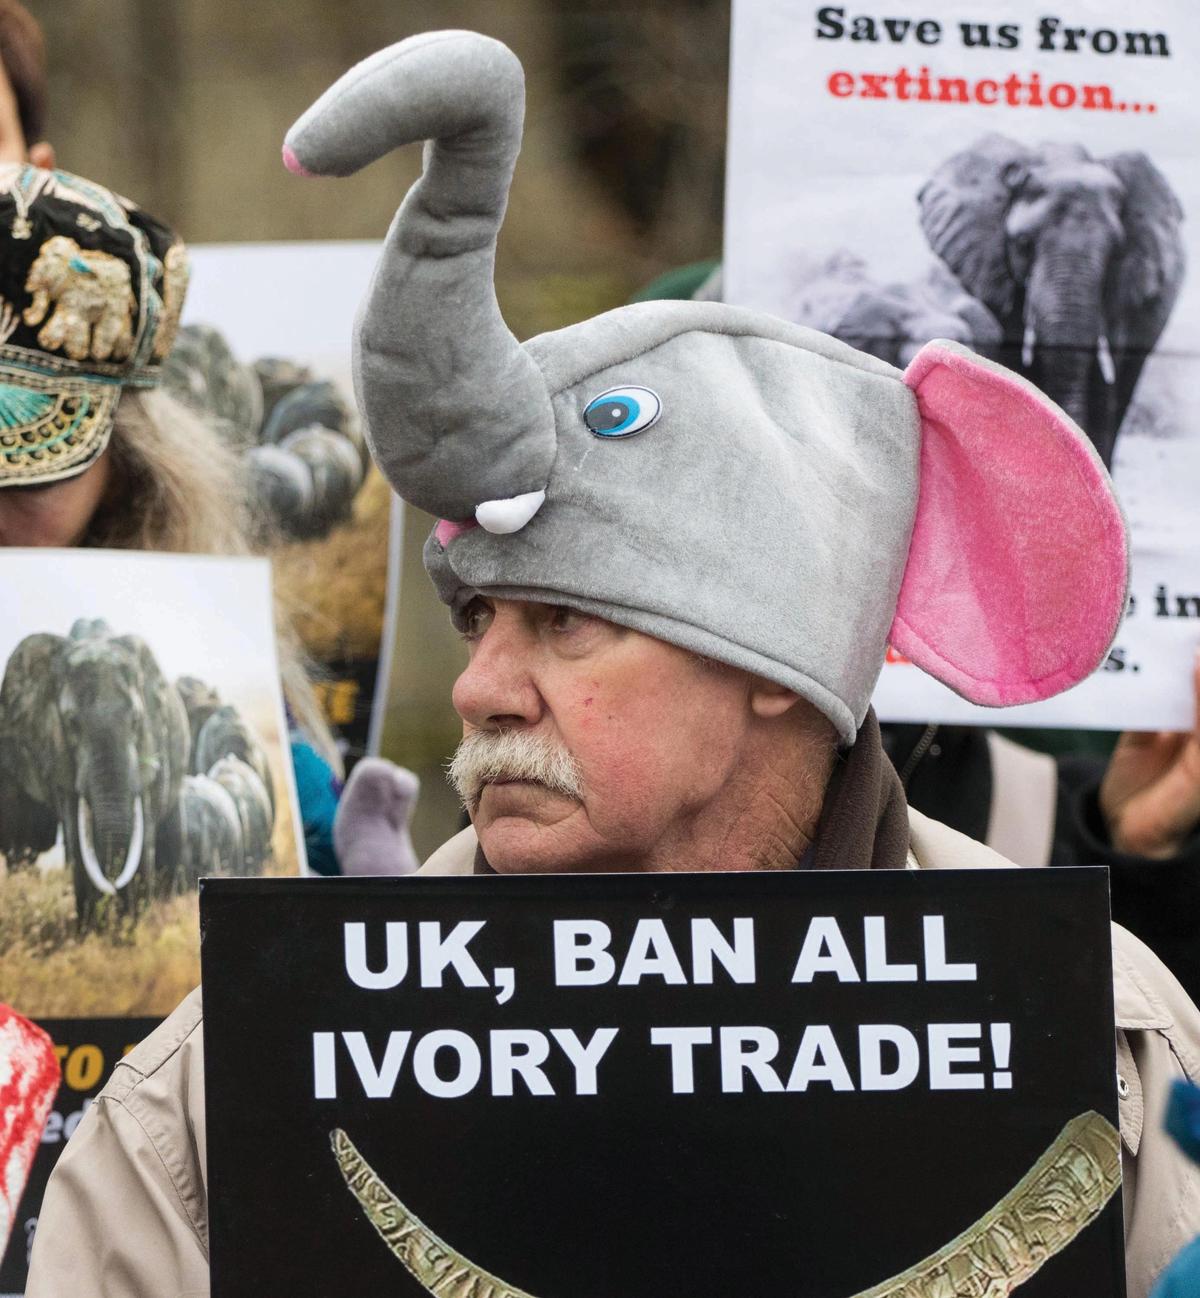 Protestors calling for a ban on the ivory trade outside the Houses of Parliament in 2017 © Paul Davey/Barcroft Media